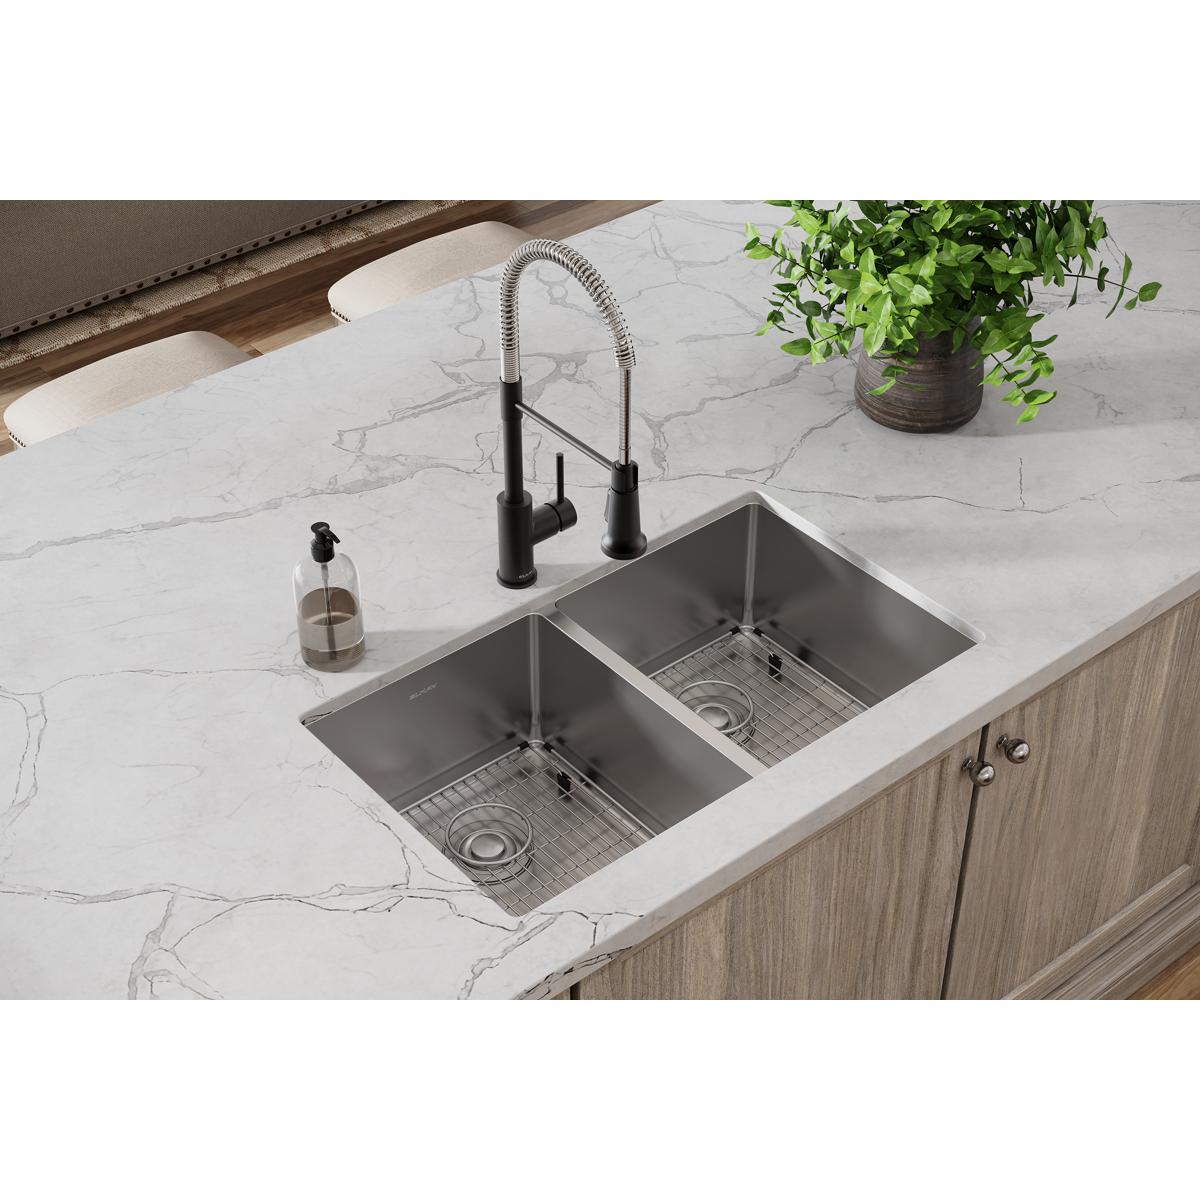 Stainless Steel Single Bowl Inset Compact Kitchen Sink Drainer Polished Plumbing 